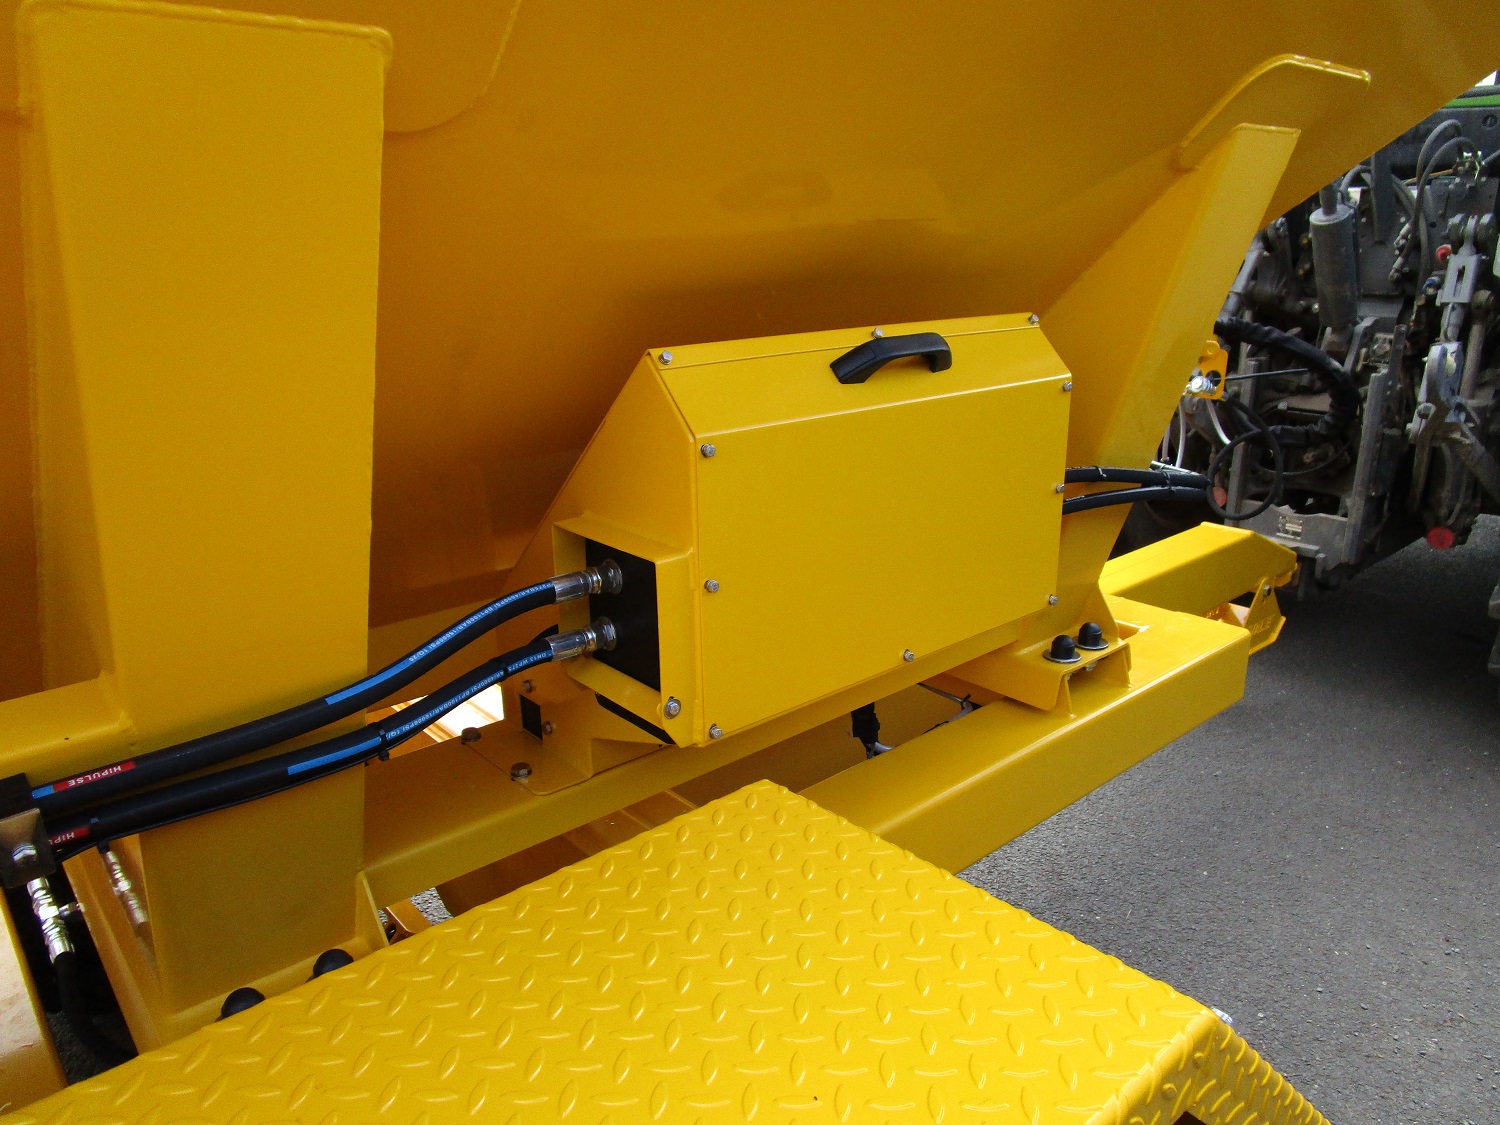 Tractor Towed Salt Spreader (Gritter) TS6000 - control box